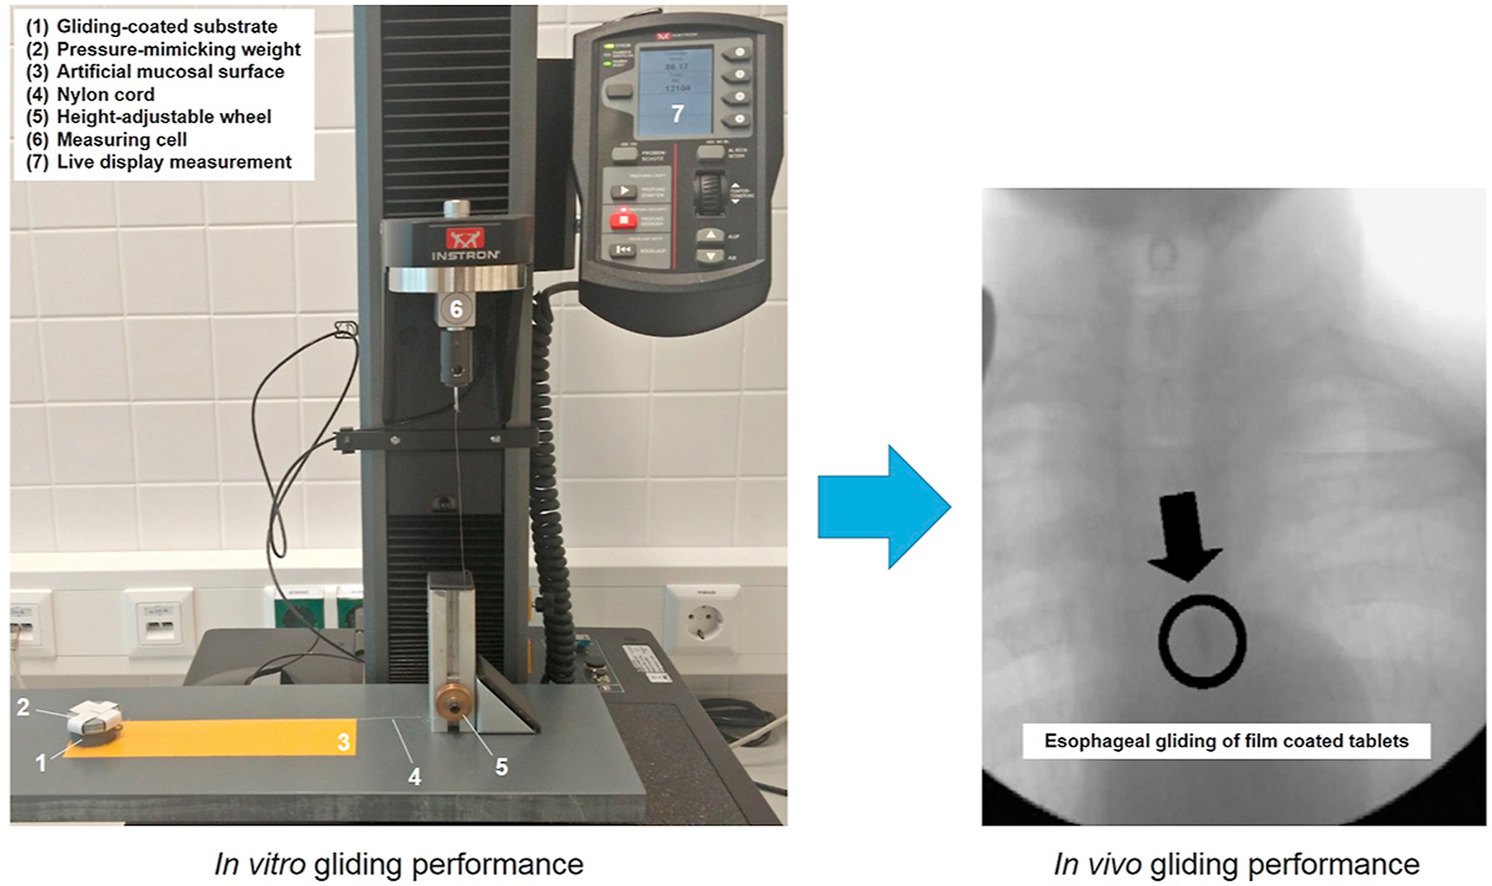 An evaluation of film coating materials and their predicted oro-esophageal gliding performance for solid oral dosage forms